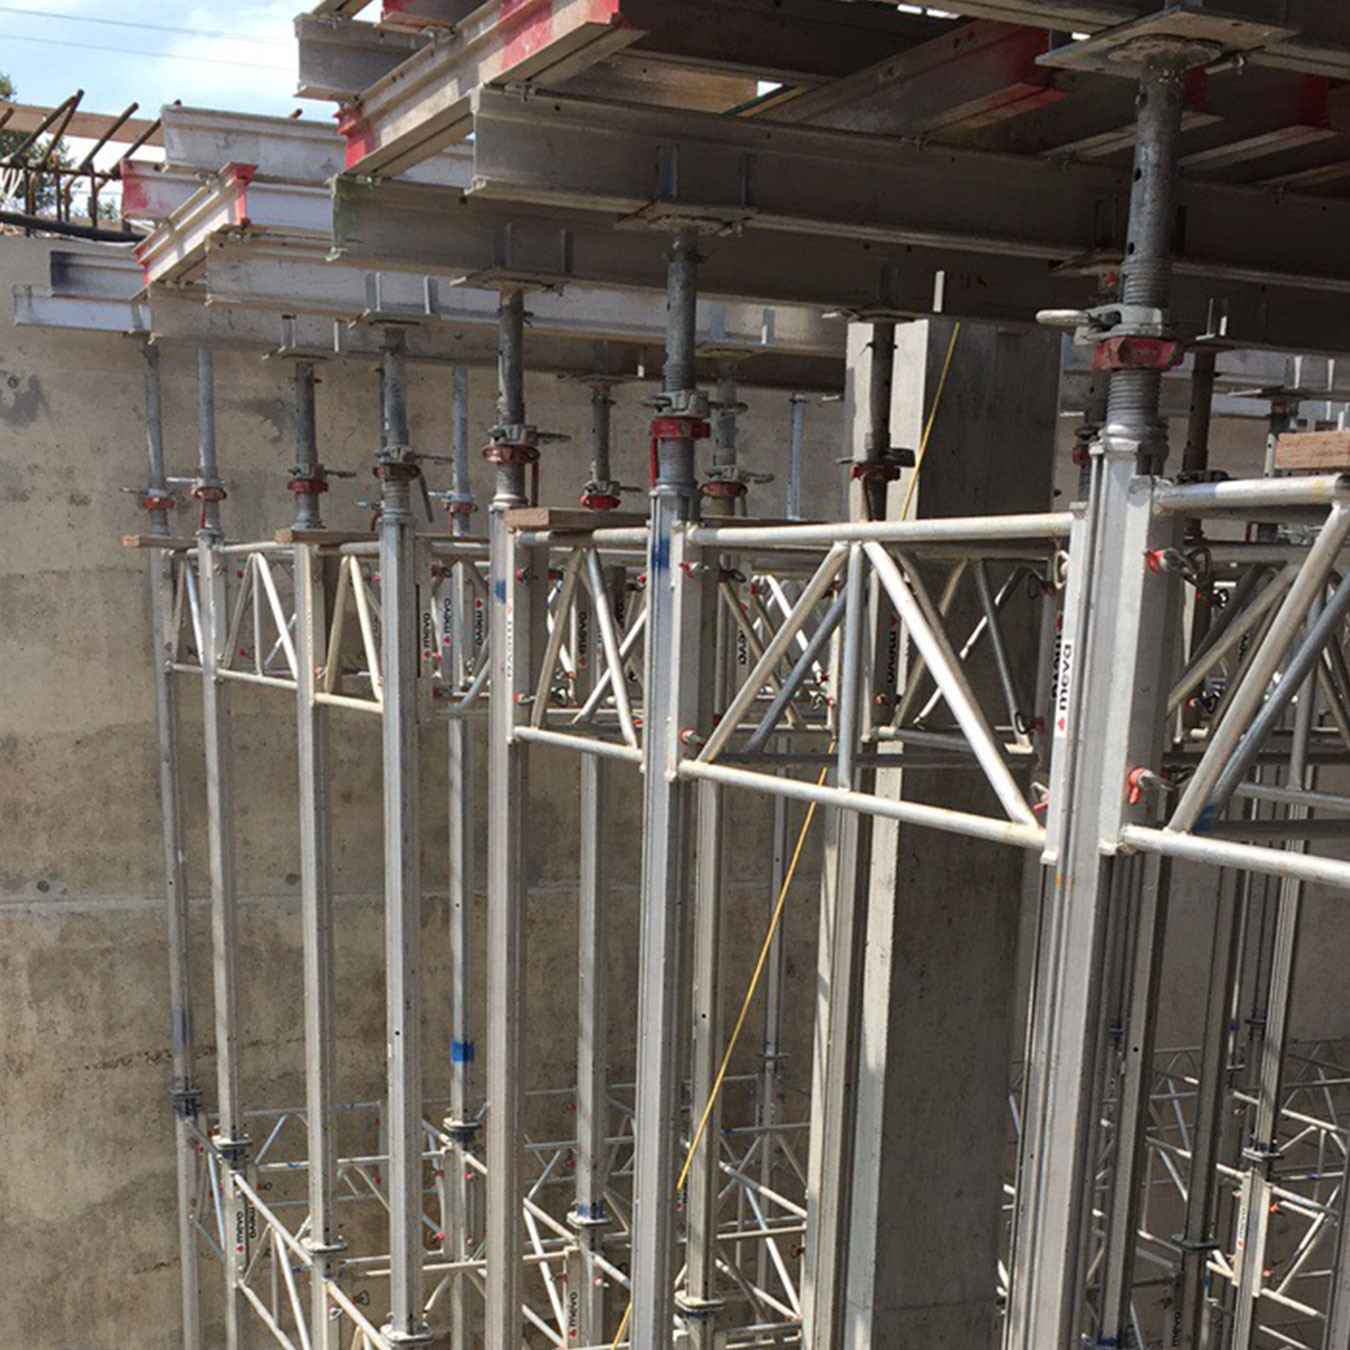 Shoring system used to support concrete construction